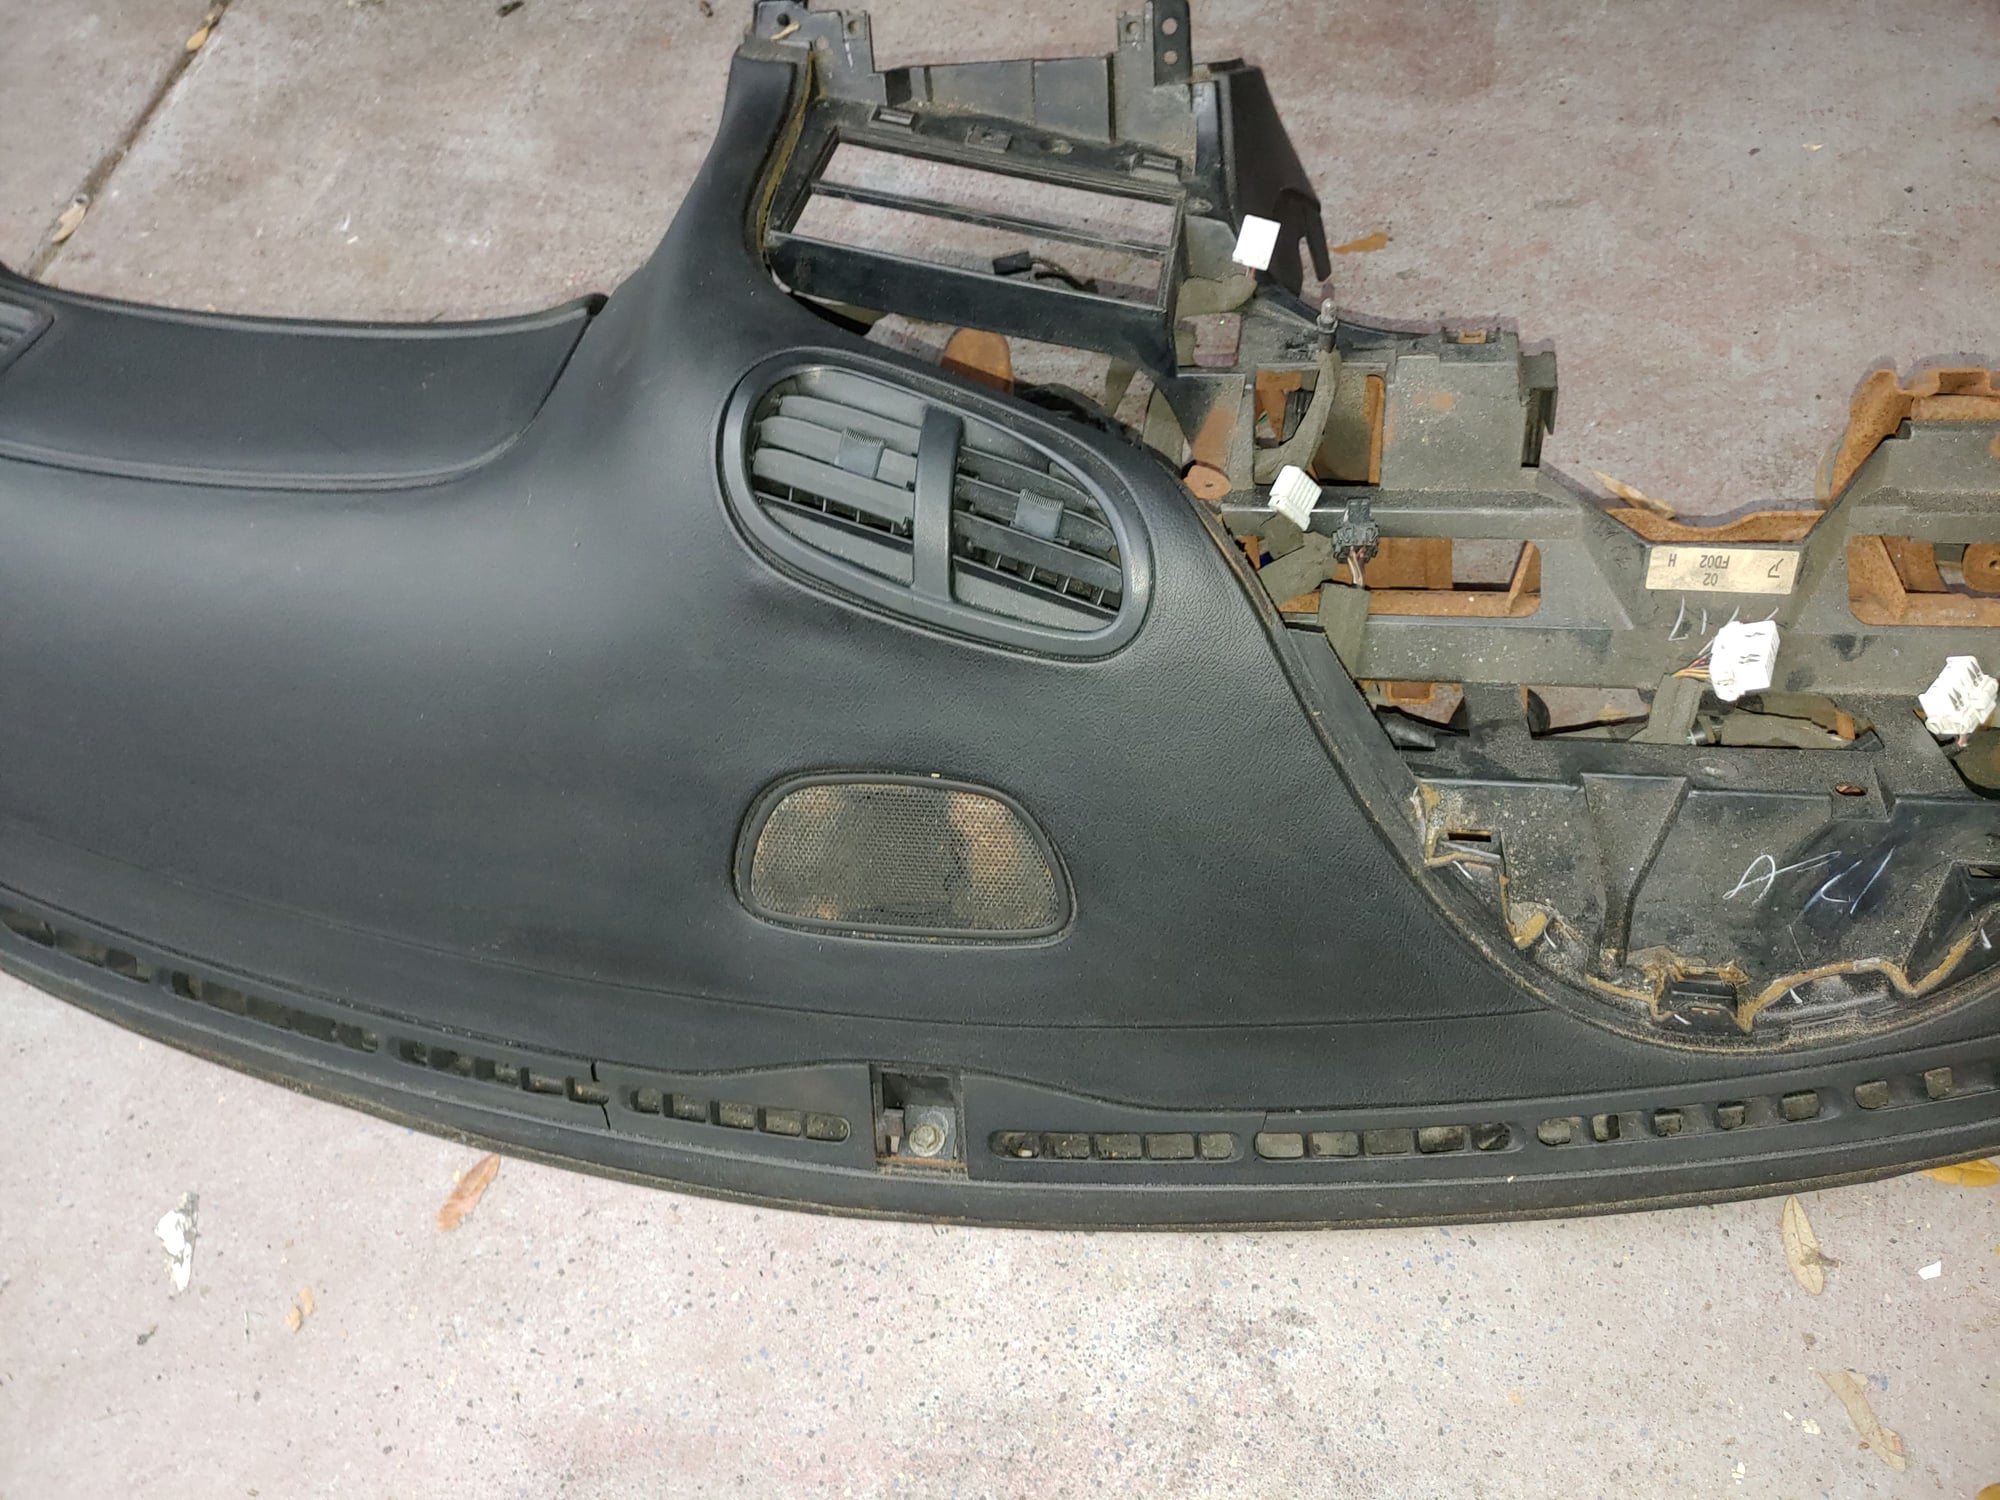 Interior/Upholstery - 1993 FD - LHD Dash - Included Wiring, Dash Bar, Glove Box, Center + Passenger Vent - Used - 1993 to 1995 Mazda RX-7 - Tampa, FL 34610, United States